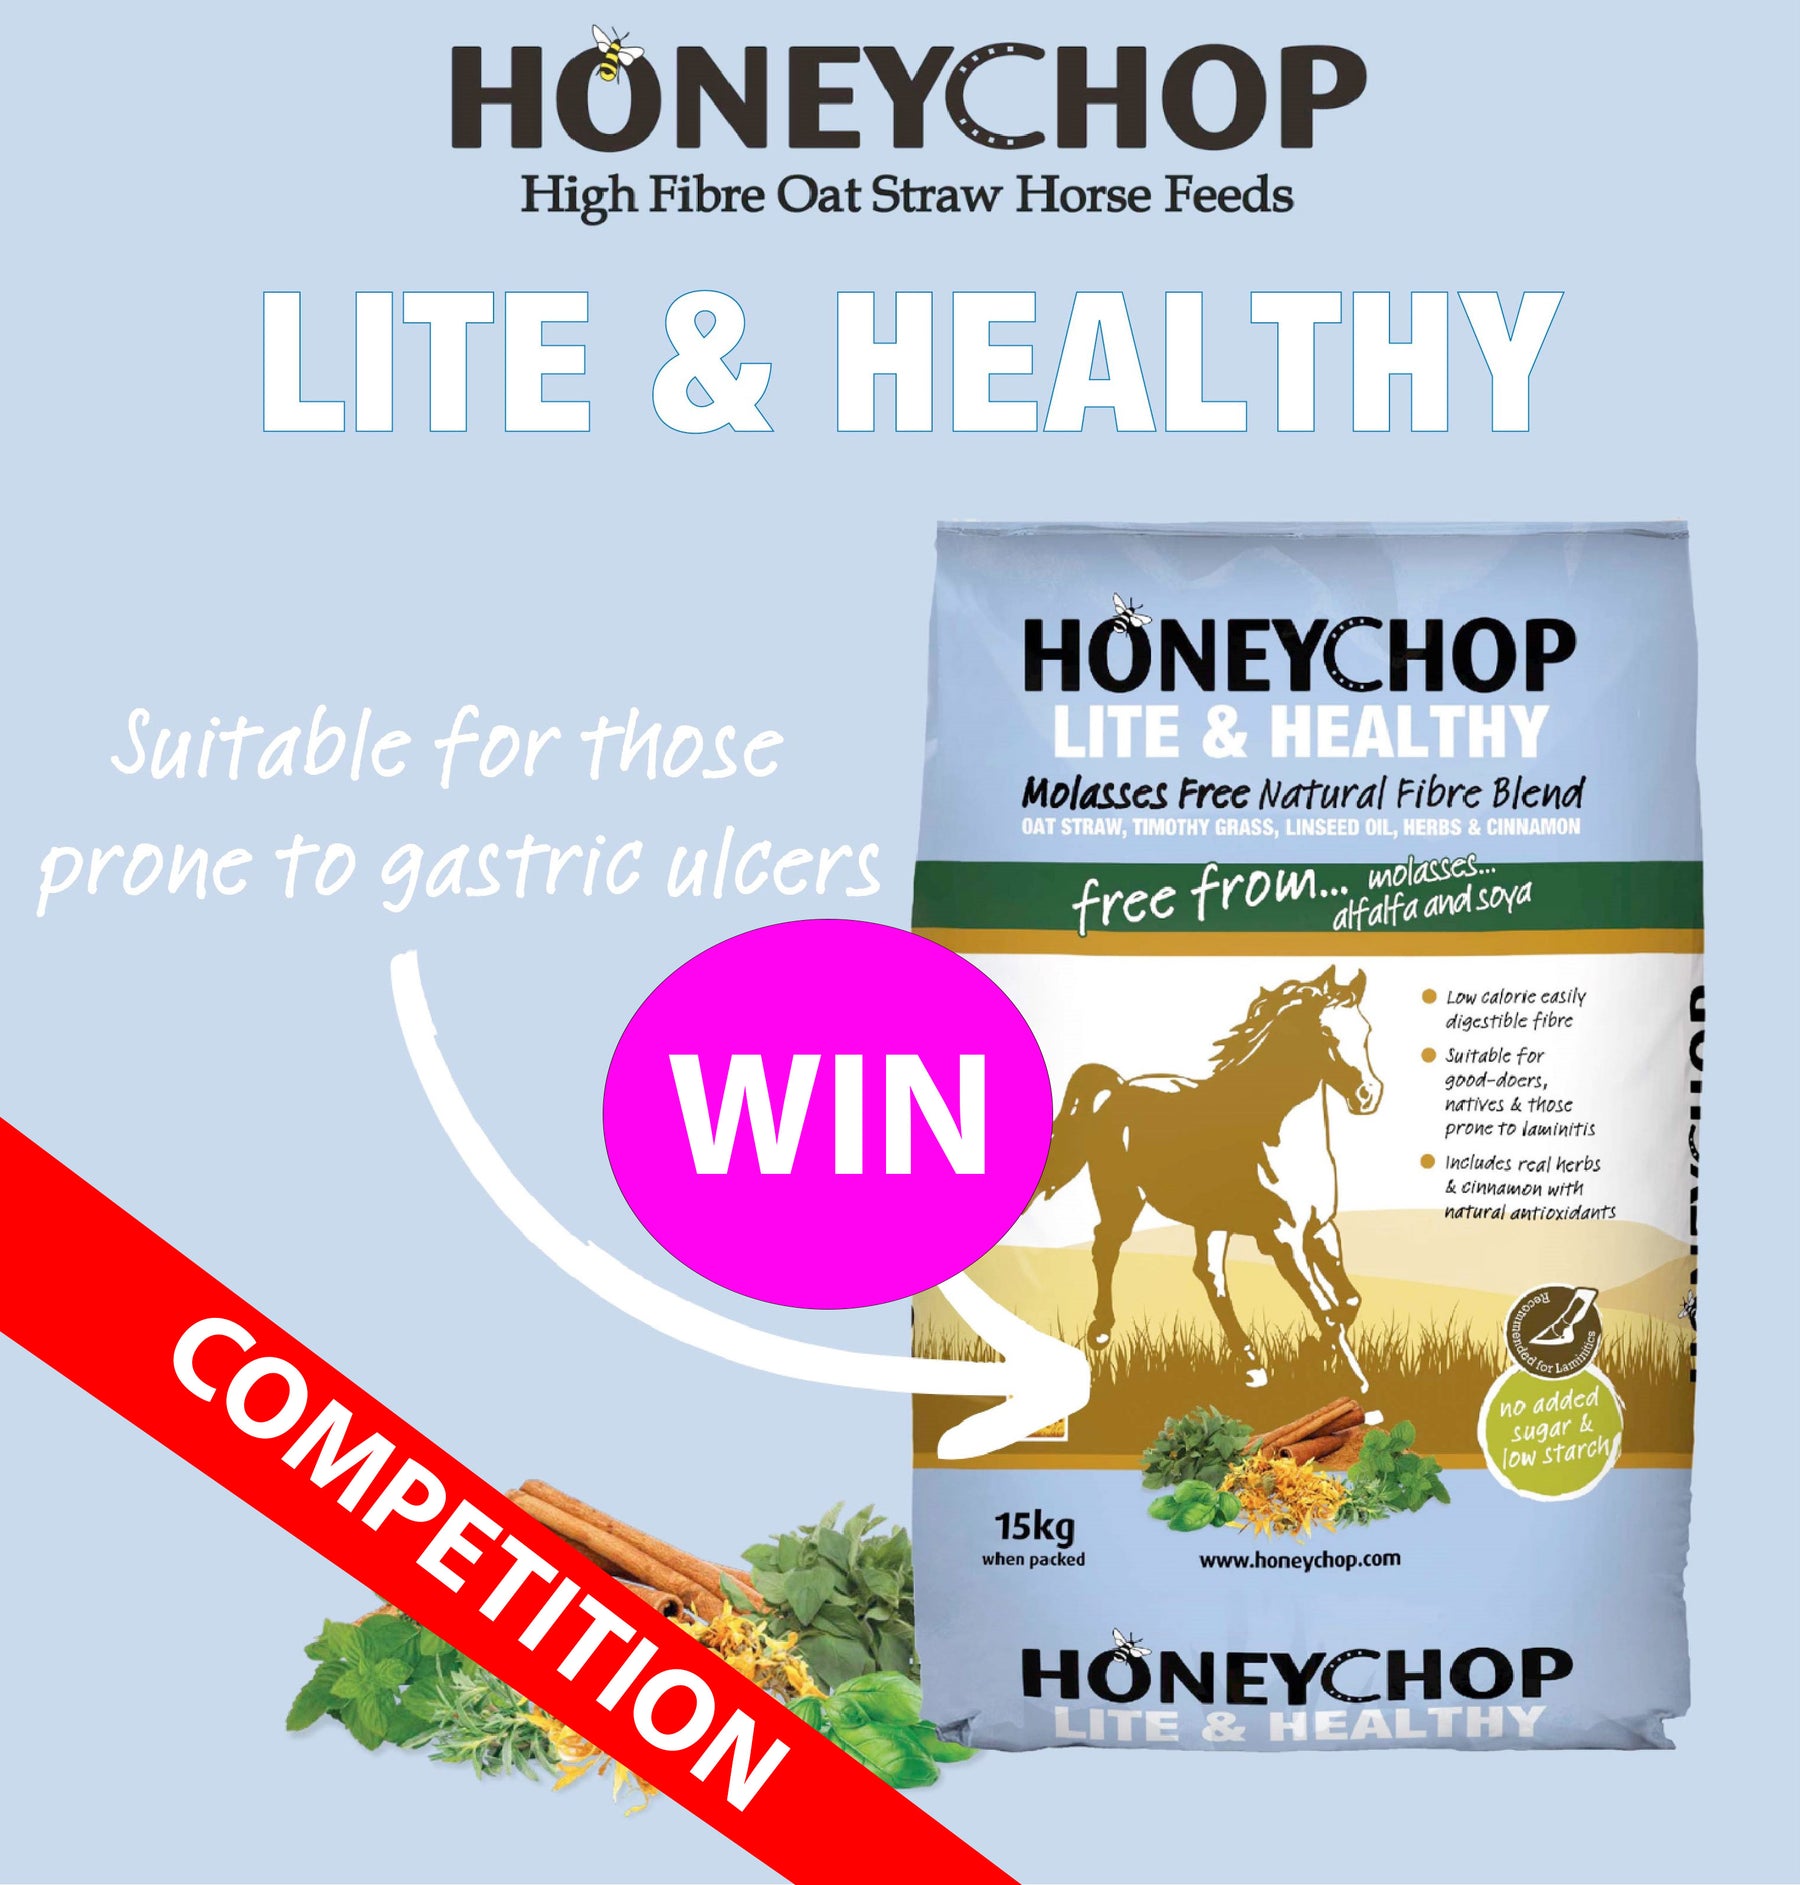 COMPETITION - WIN a 15kg Bag of HONEYCHOP LITE & HEALTHY HORSE FEED